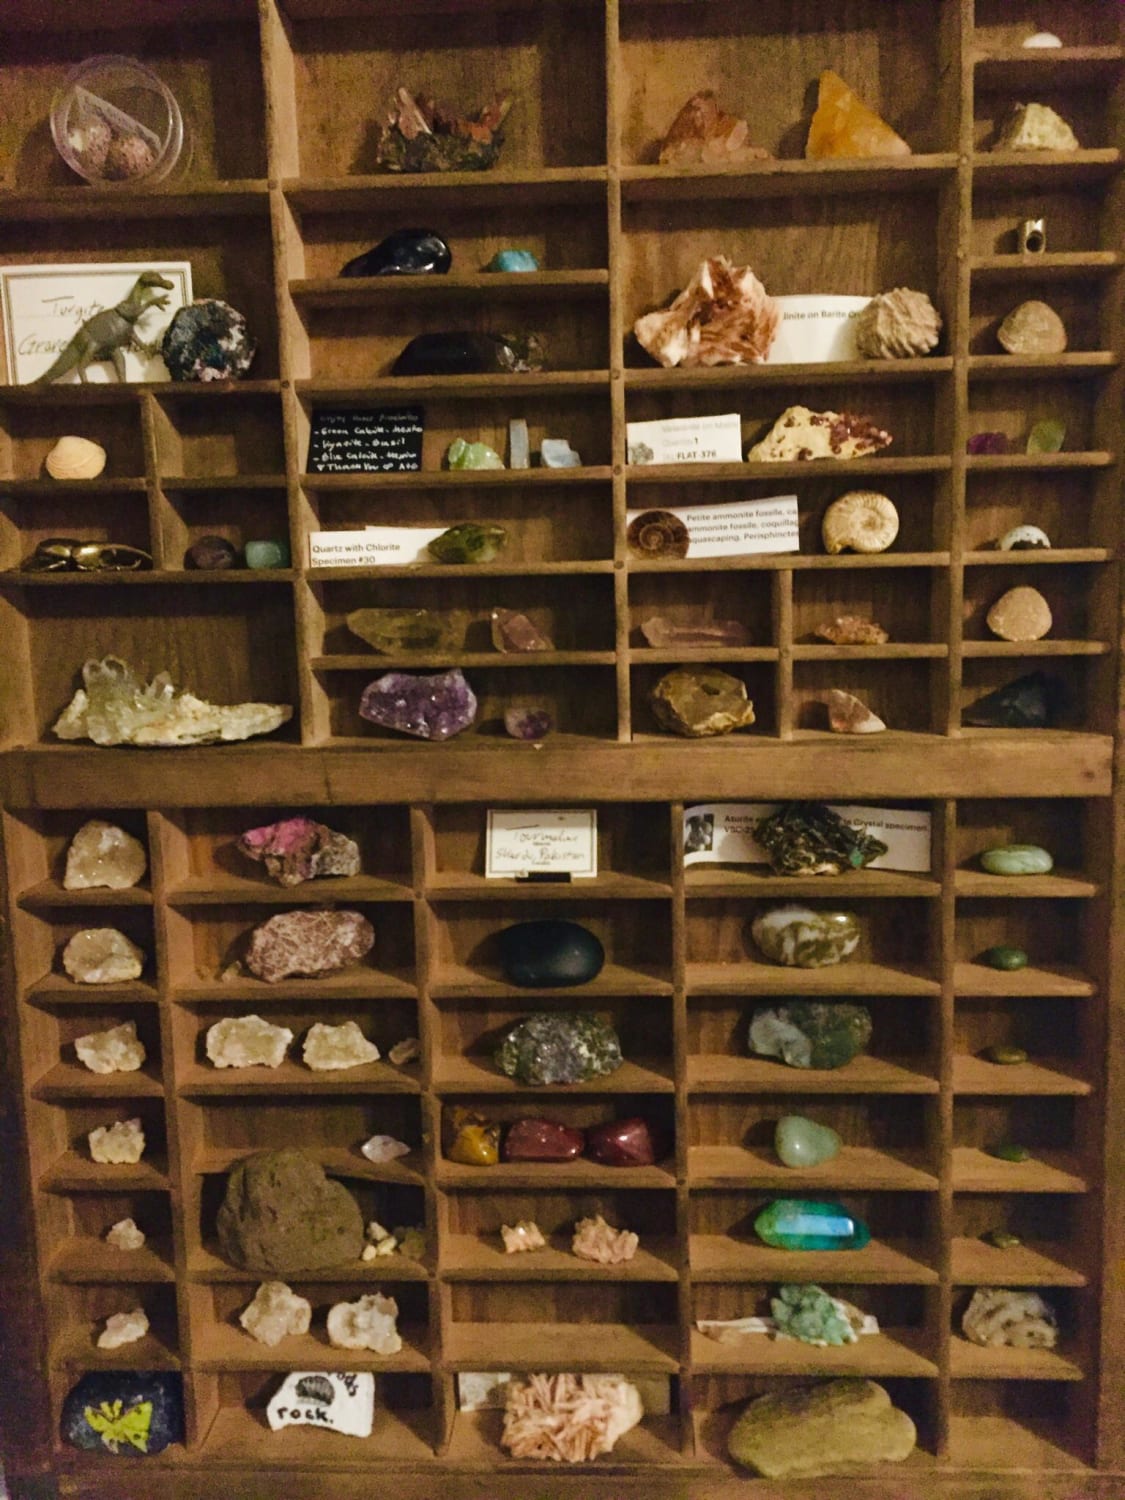 I organized my rocks and minerals by size and color.